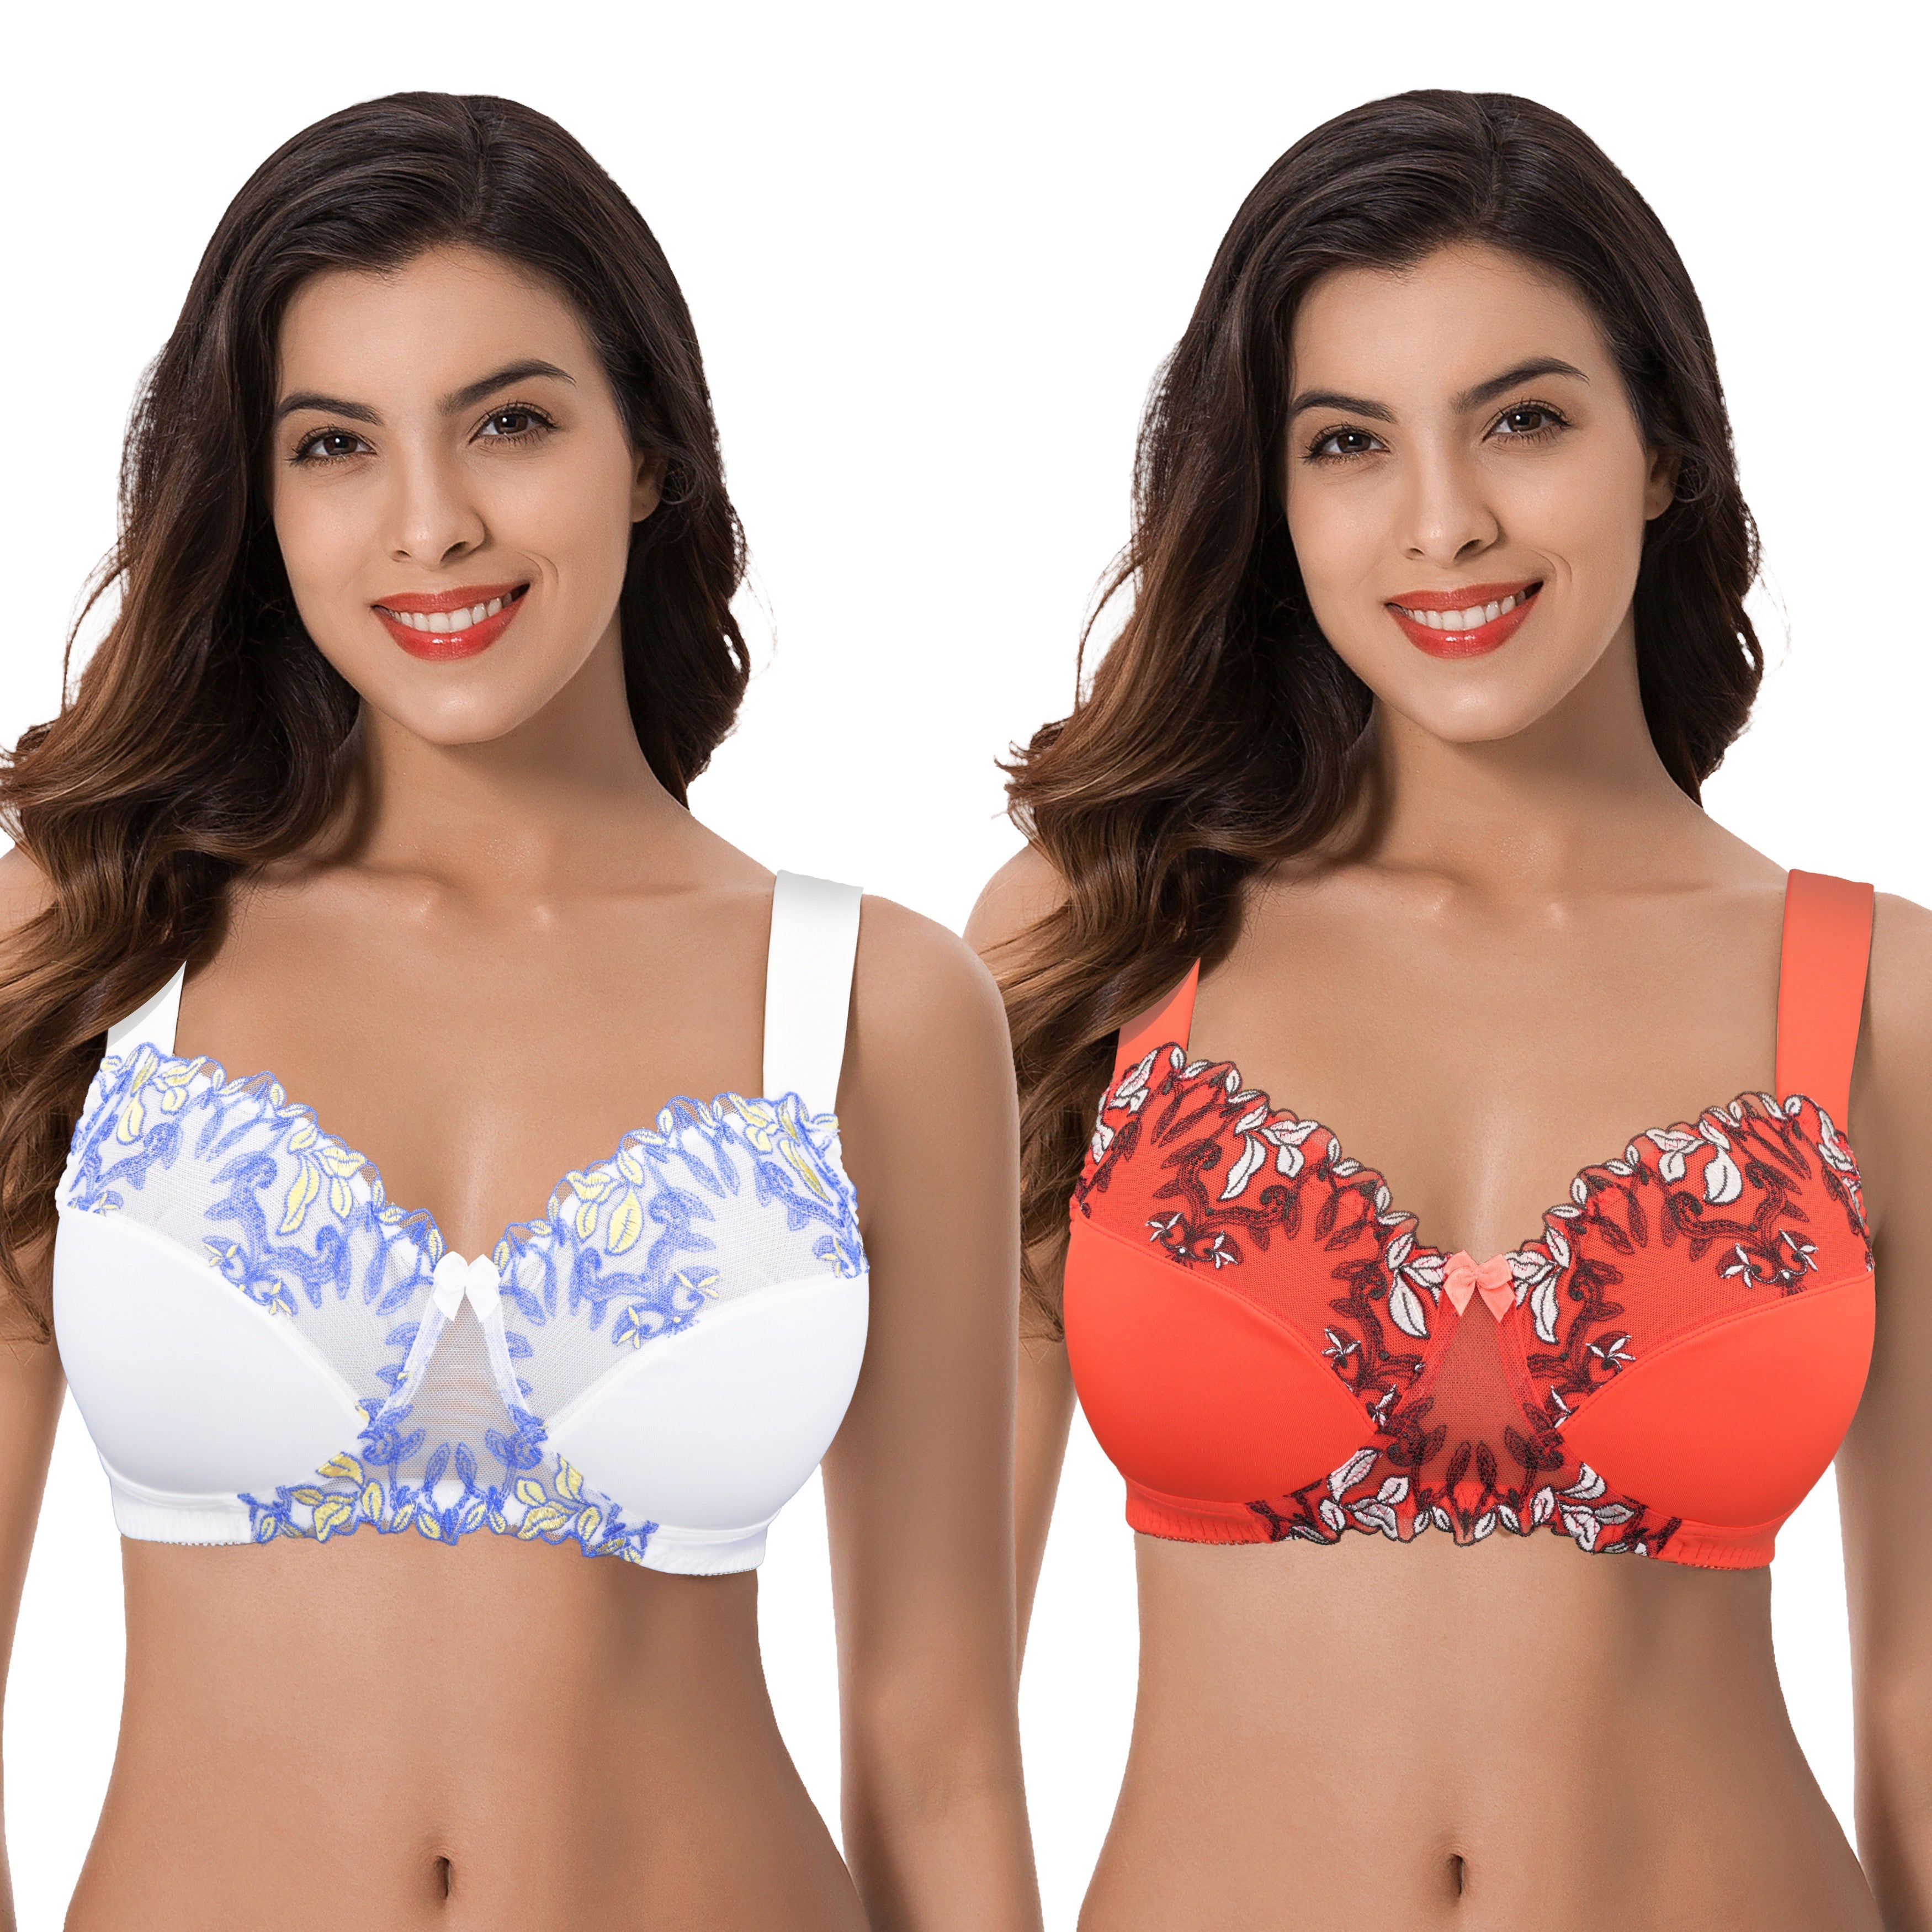 Floral Lace Wireless Bra For Women Full Mother Figure Minimizer With Bosom,  Plus Sizes 36 50 B 12 Style 210623 From Dou01, $7.31